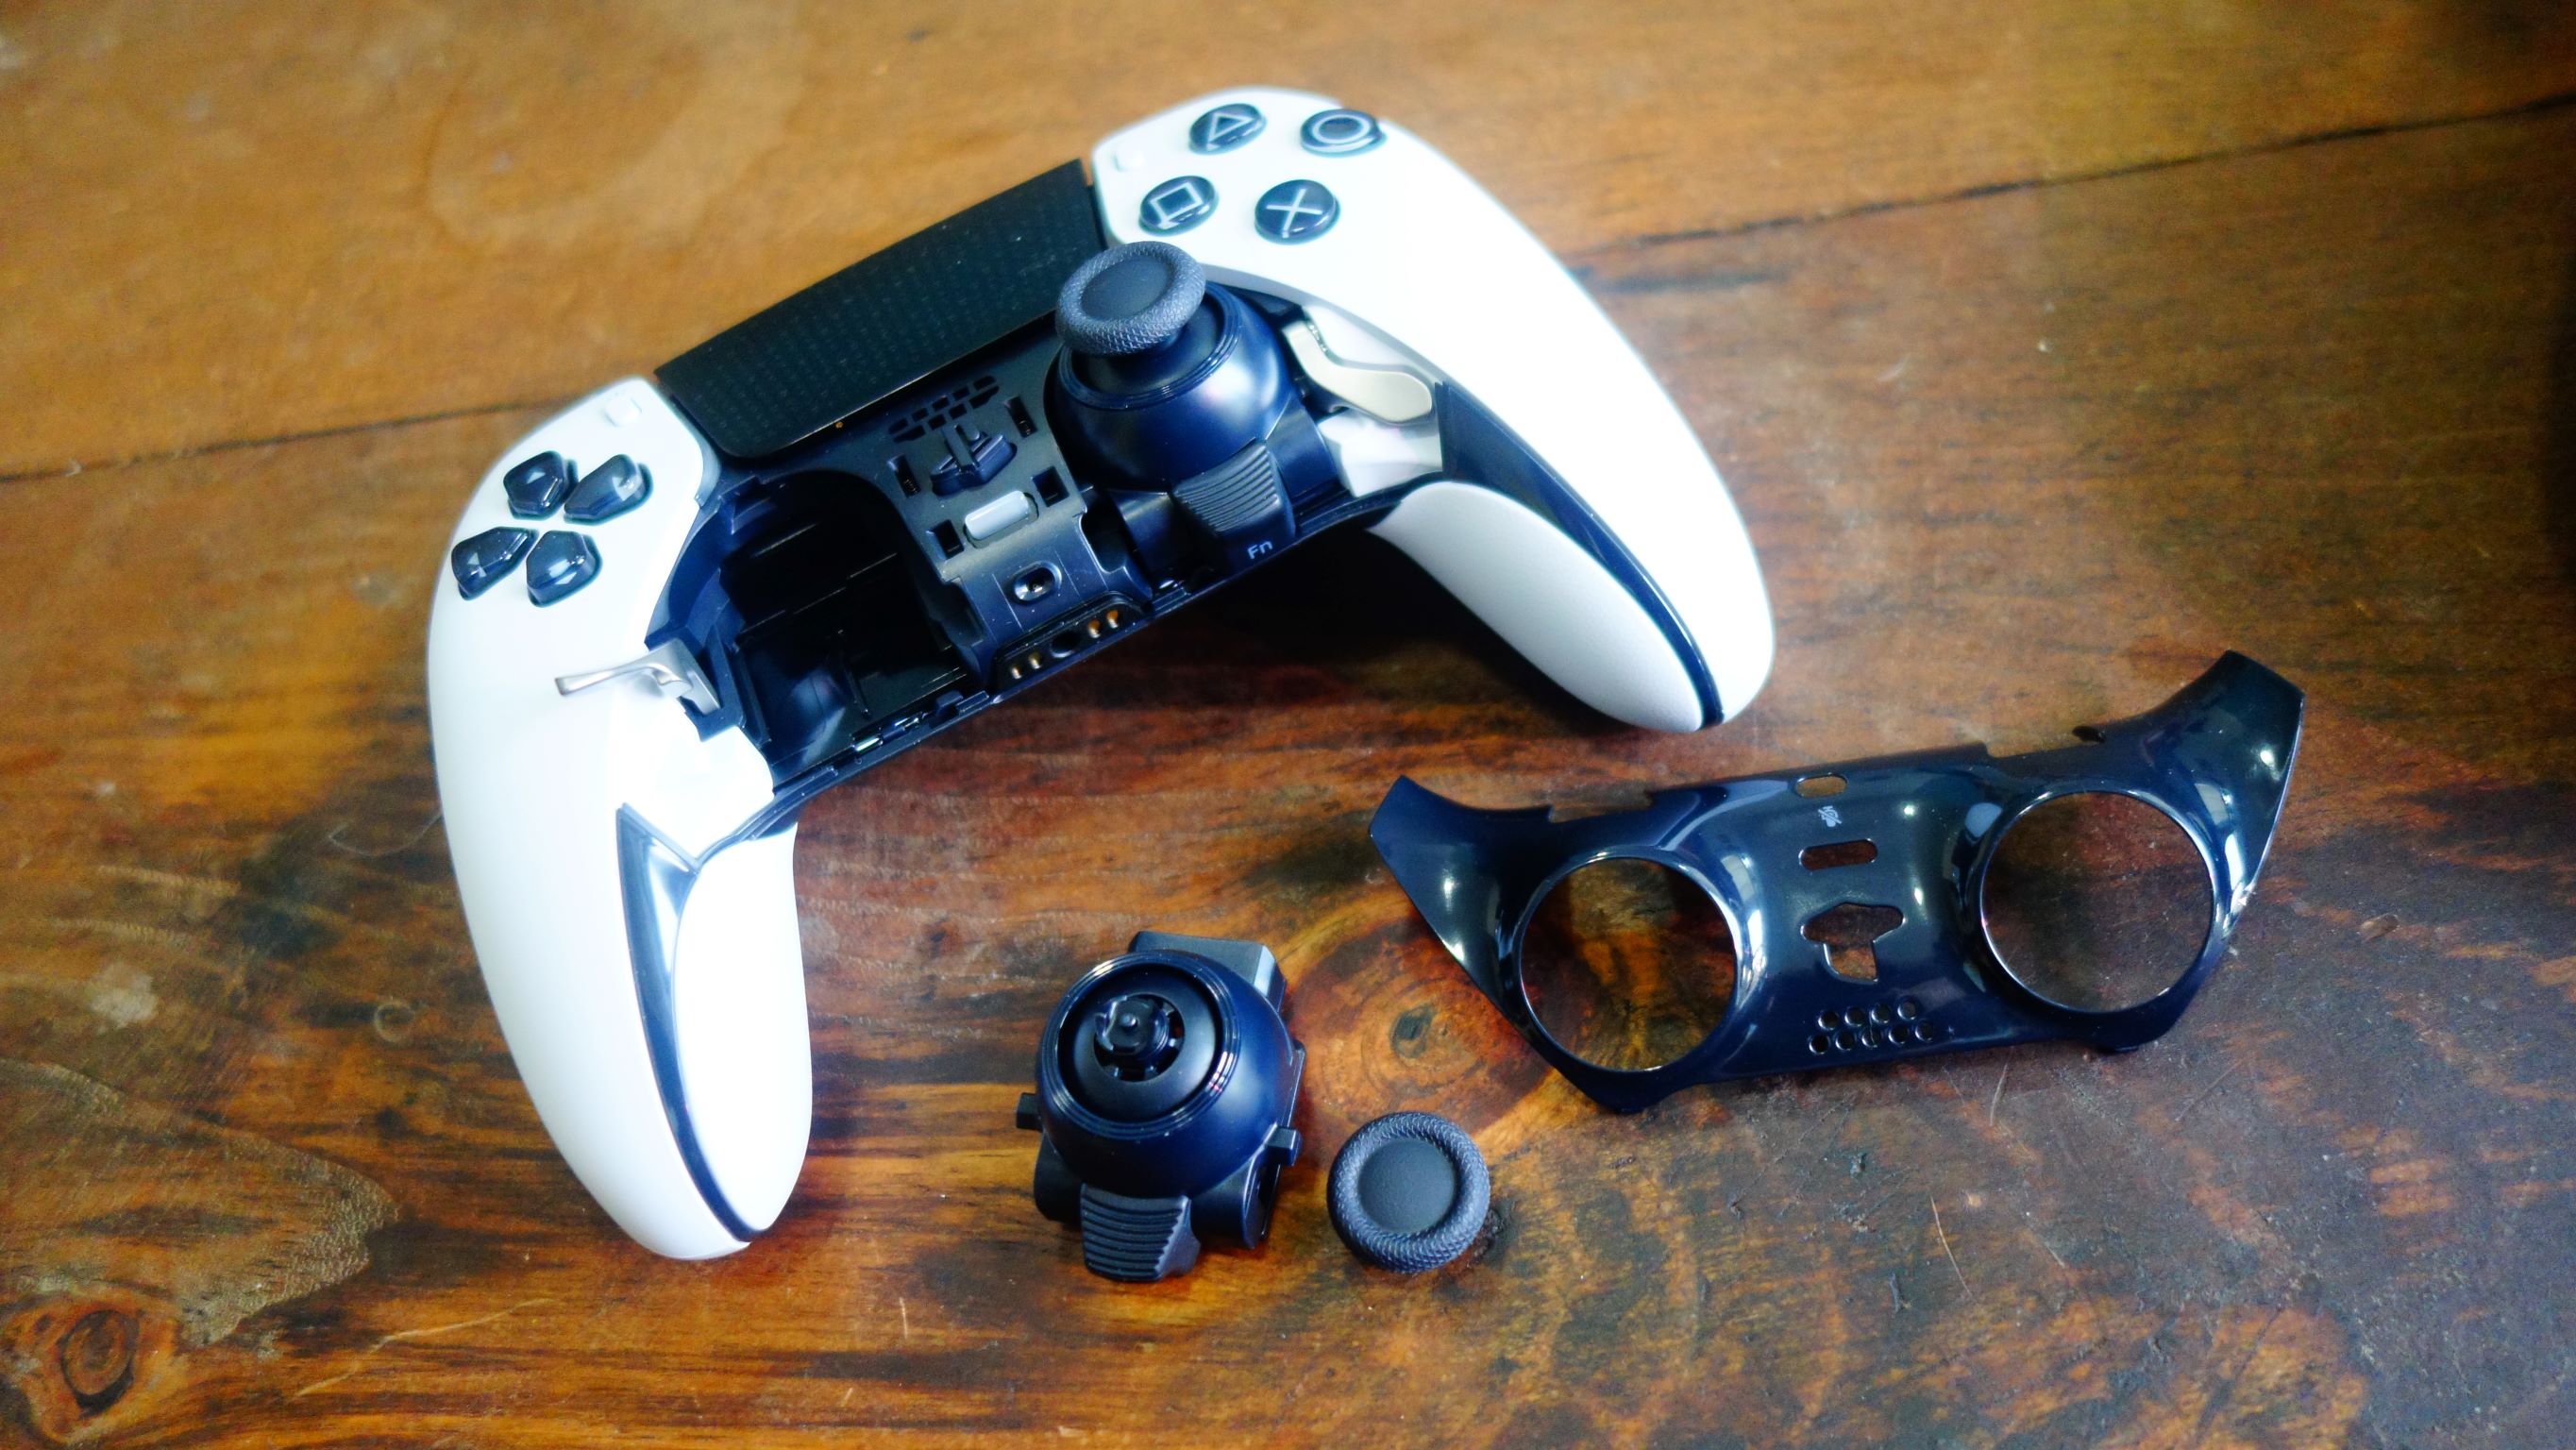 DualSense Edge Review: Sony's Premium Controller for PlayStation 5